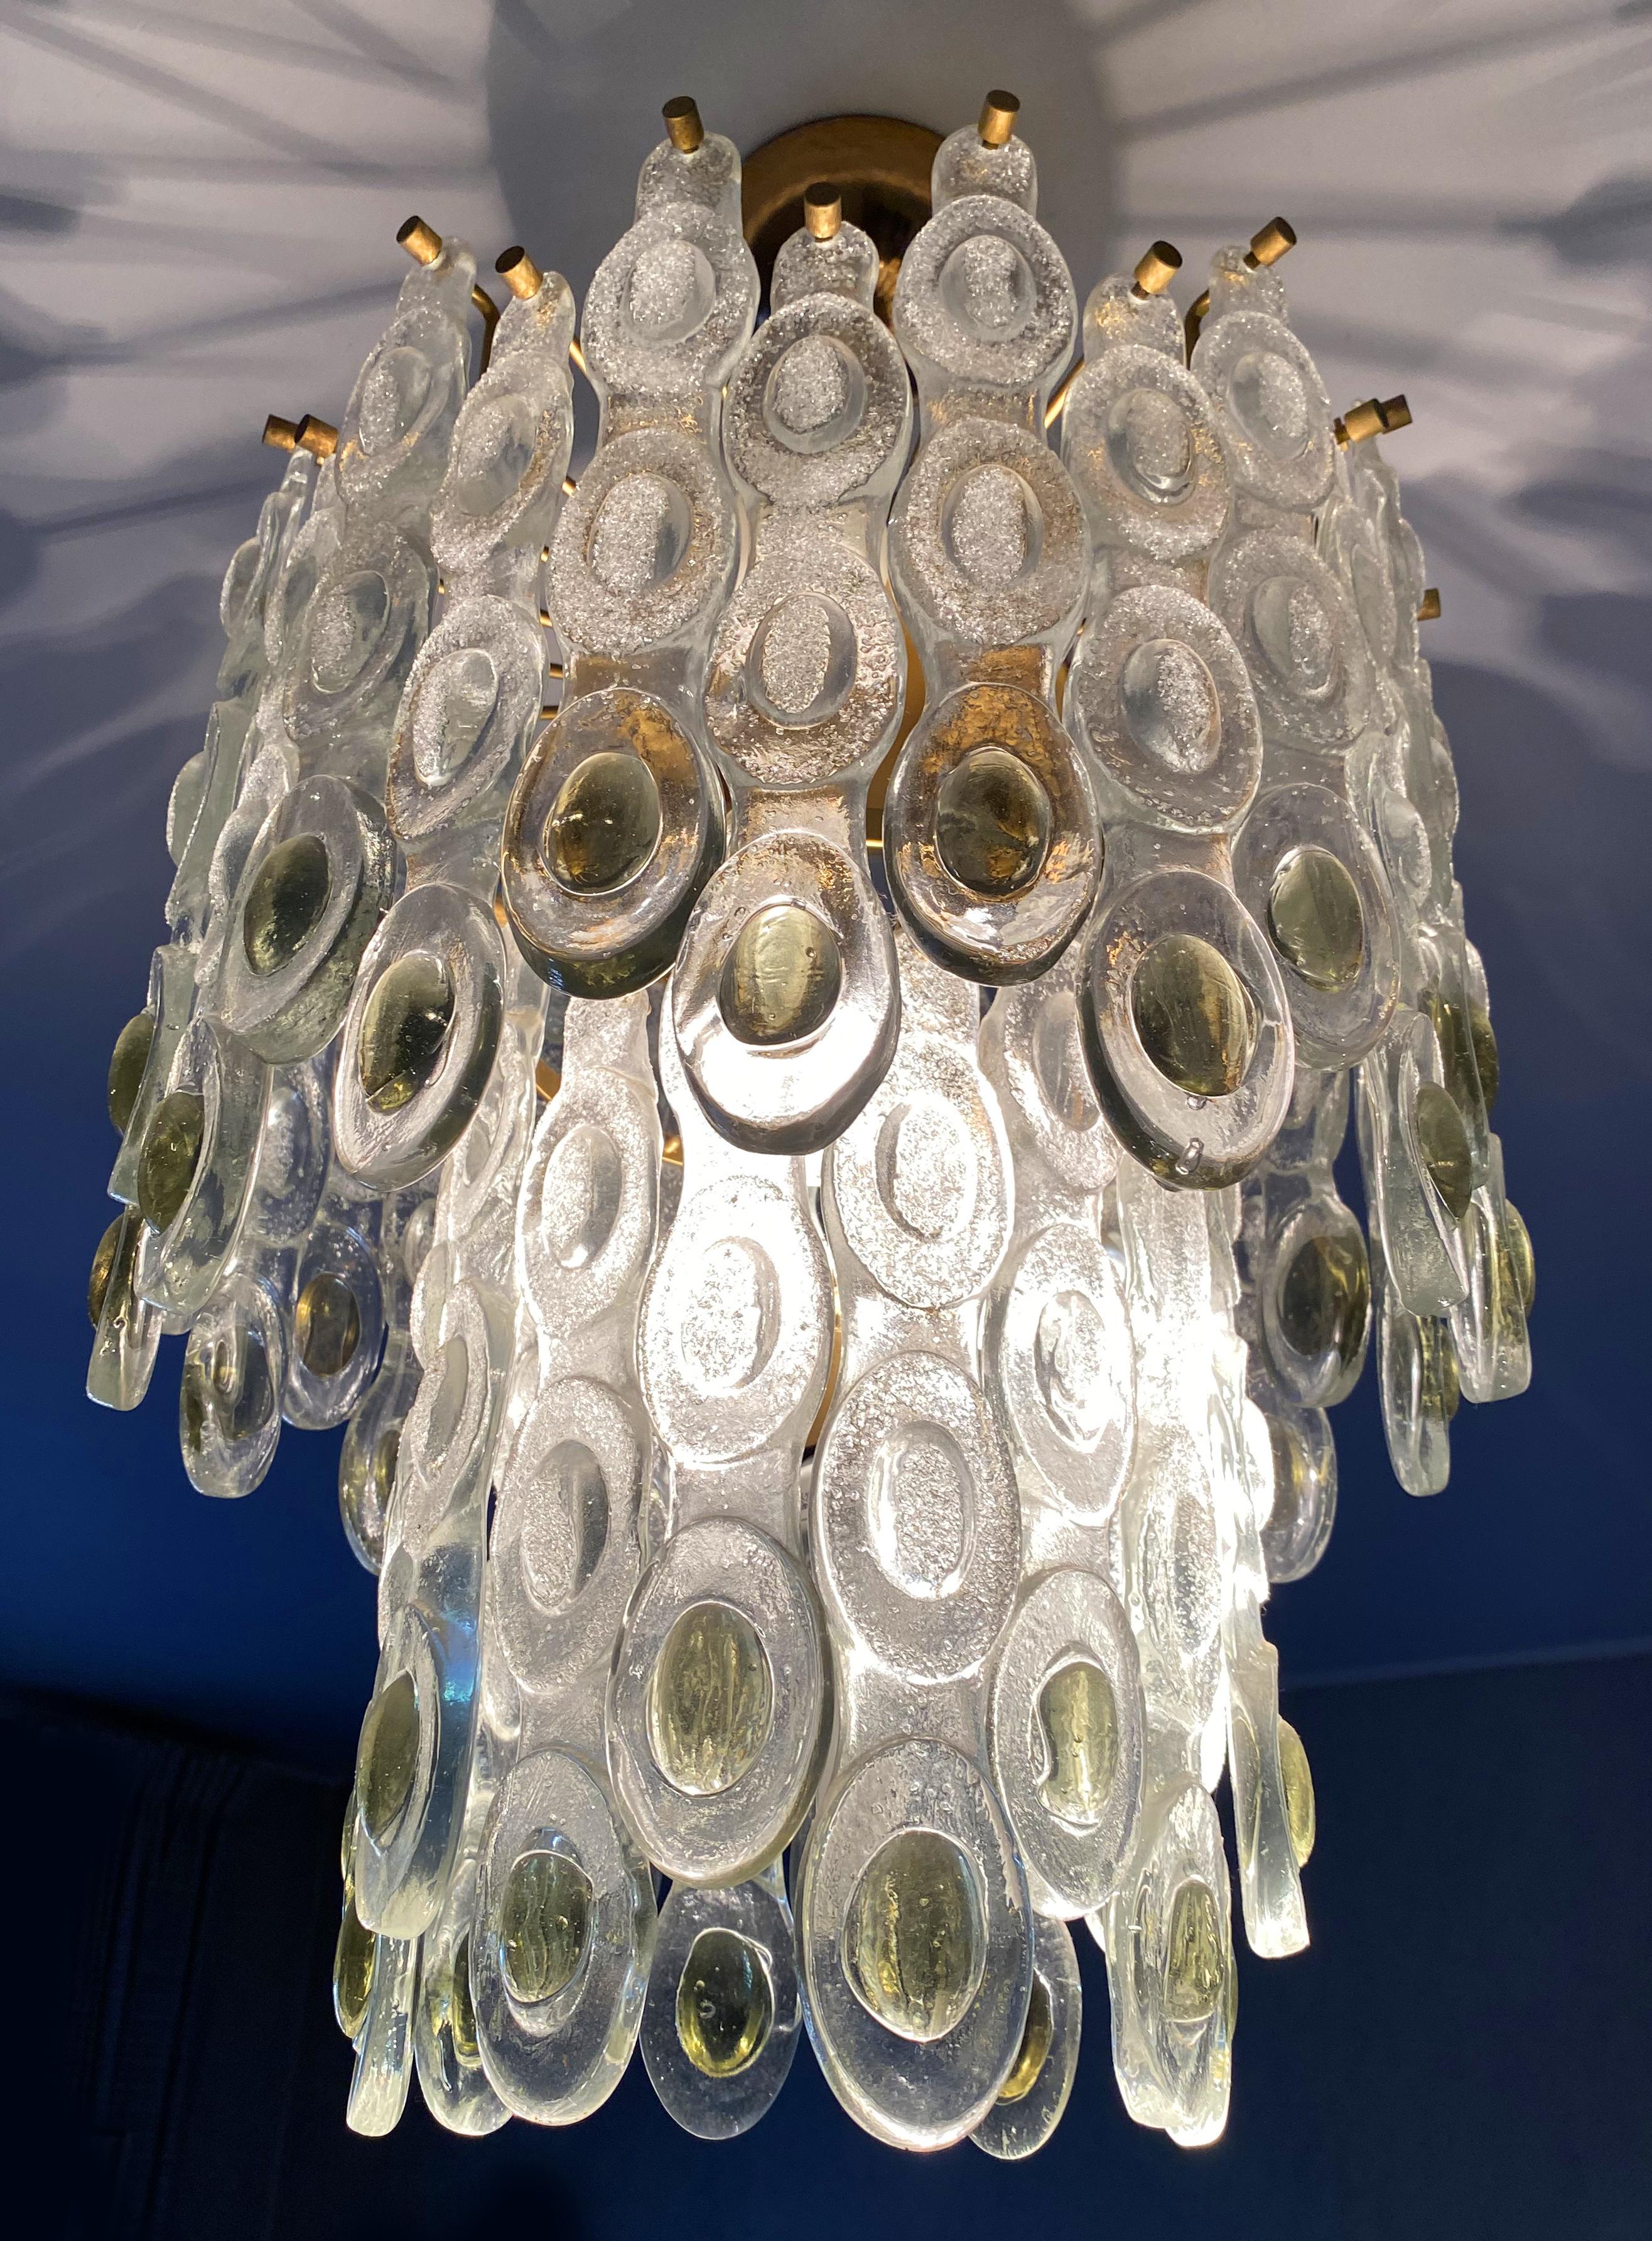 Incredibly elegant chandelier made up of dozens of lozenges. In each lozenge gems with golden inclusions are set. 7 lights.